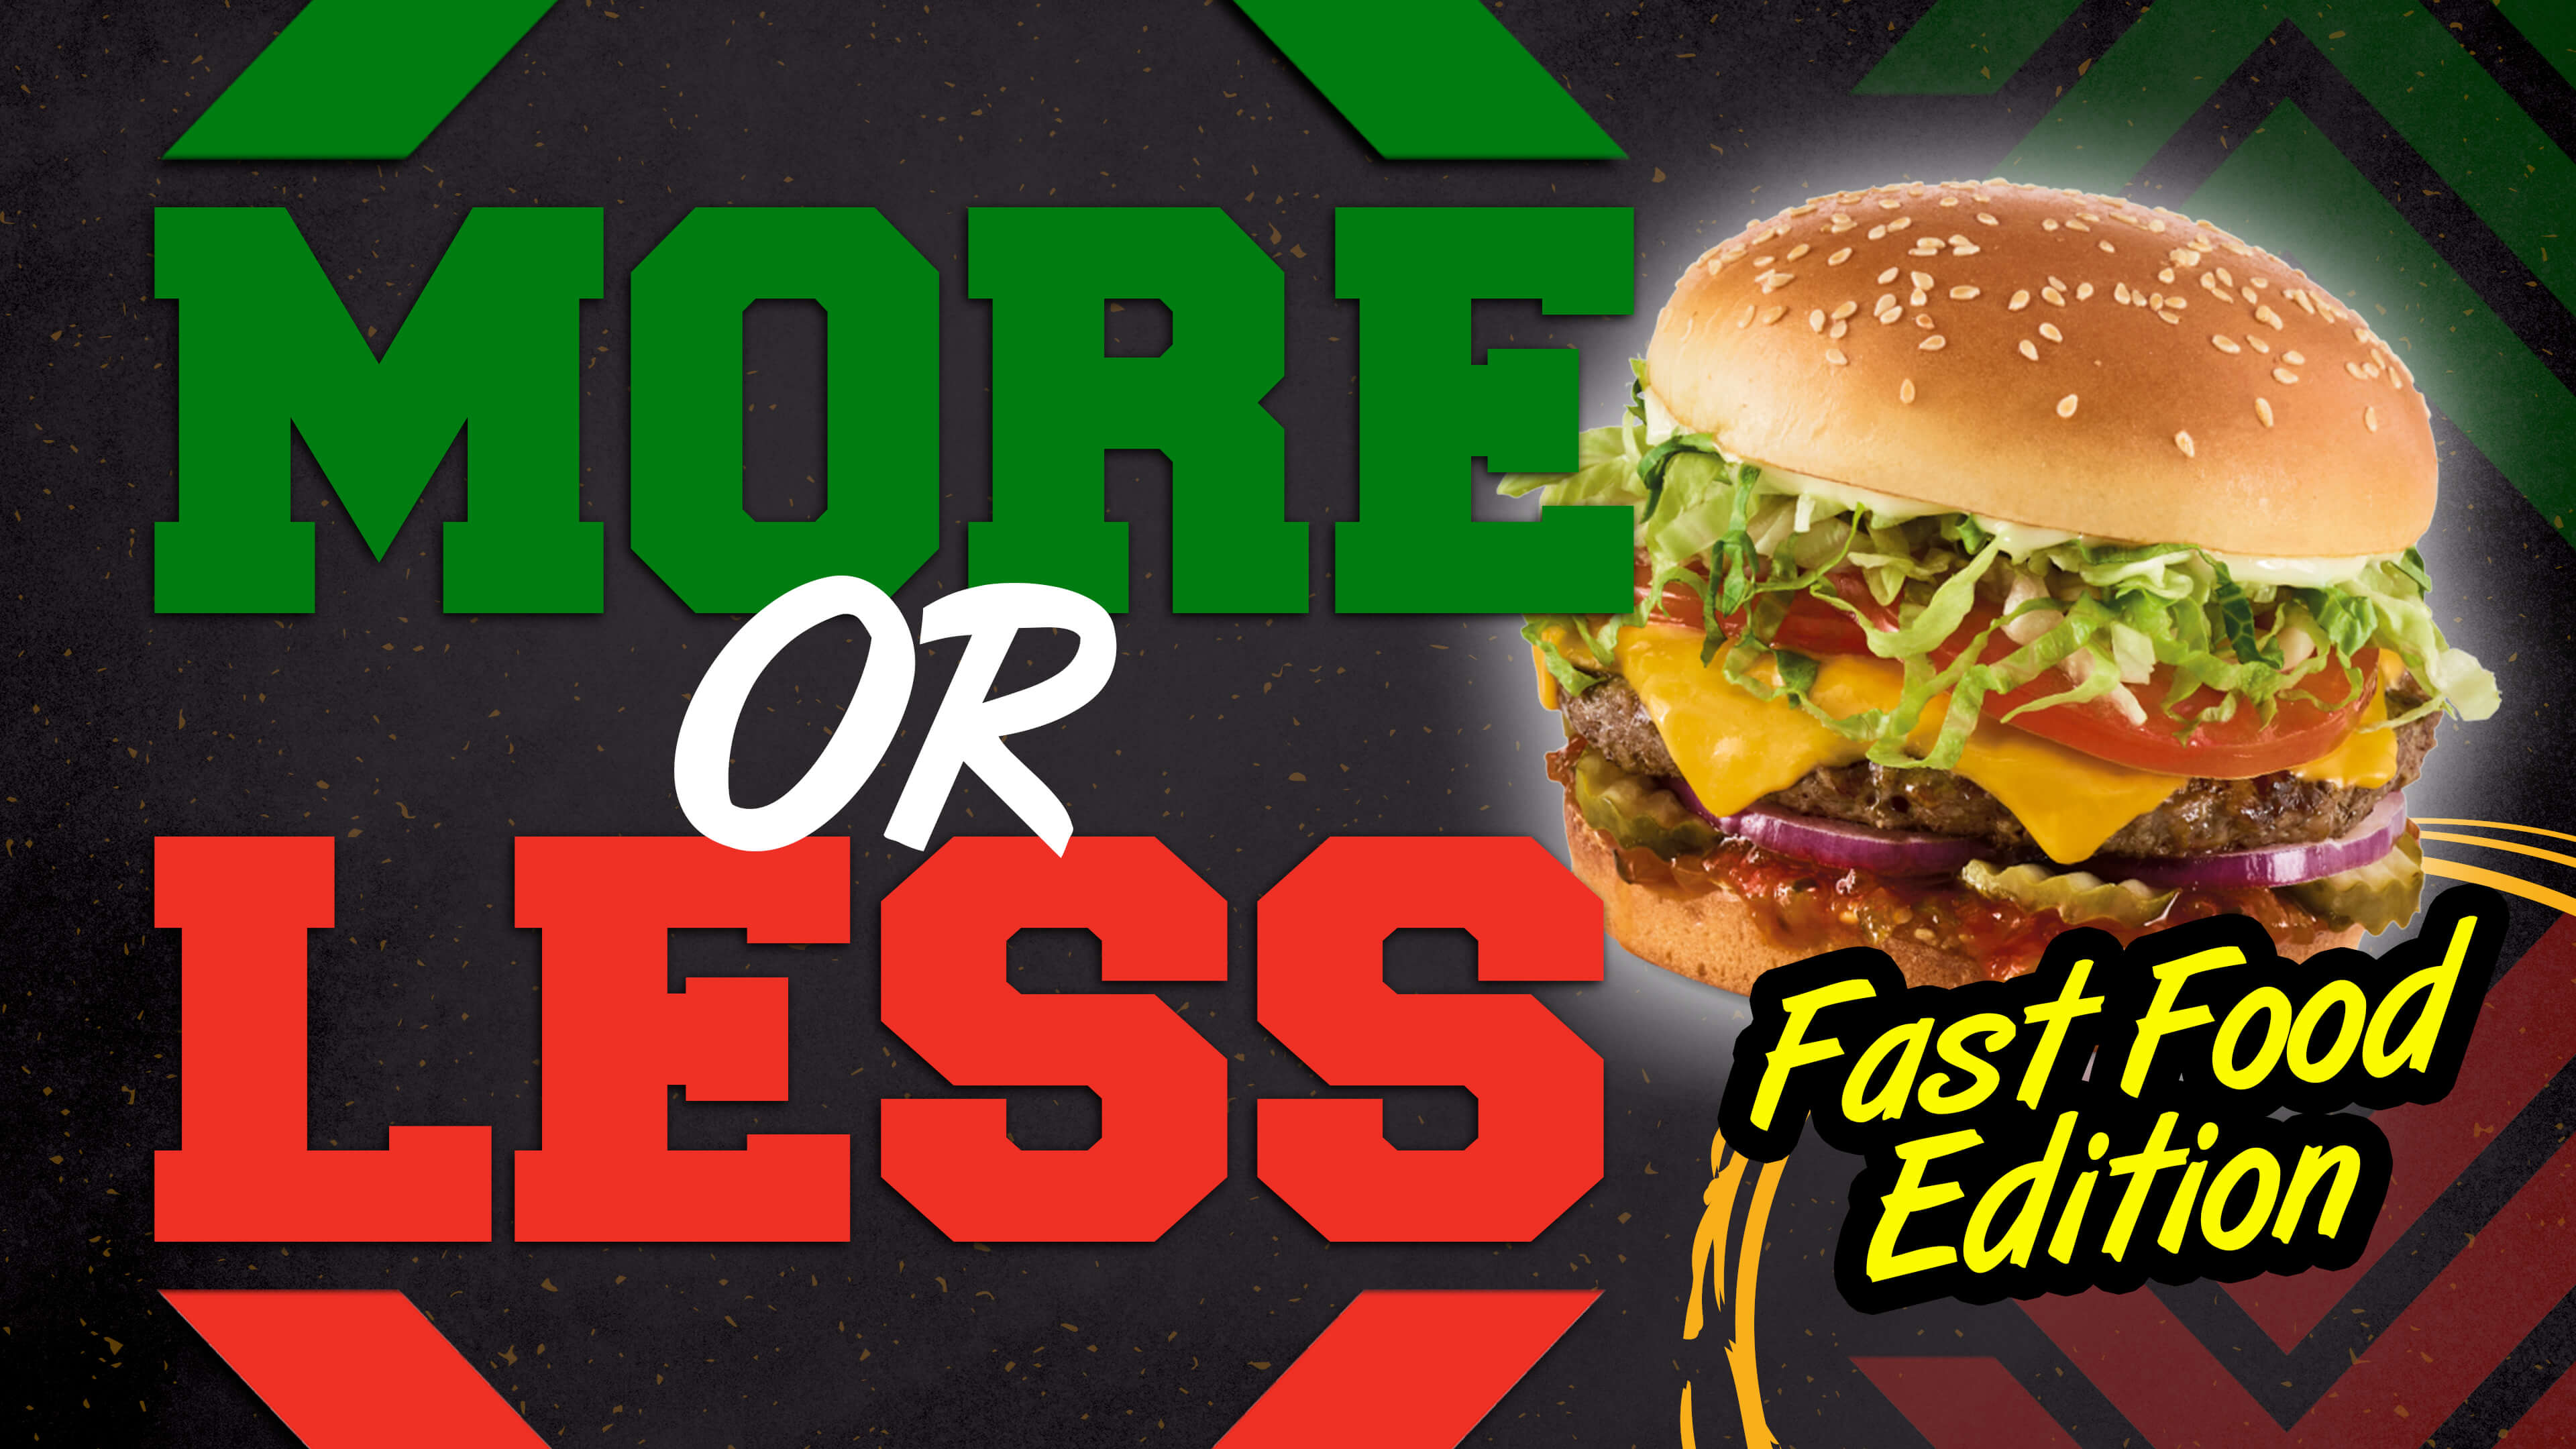 More or Less: Fast Food Edition